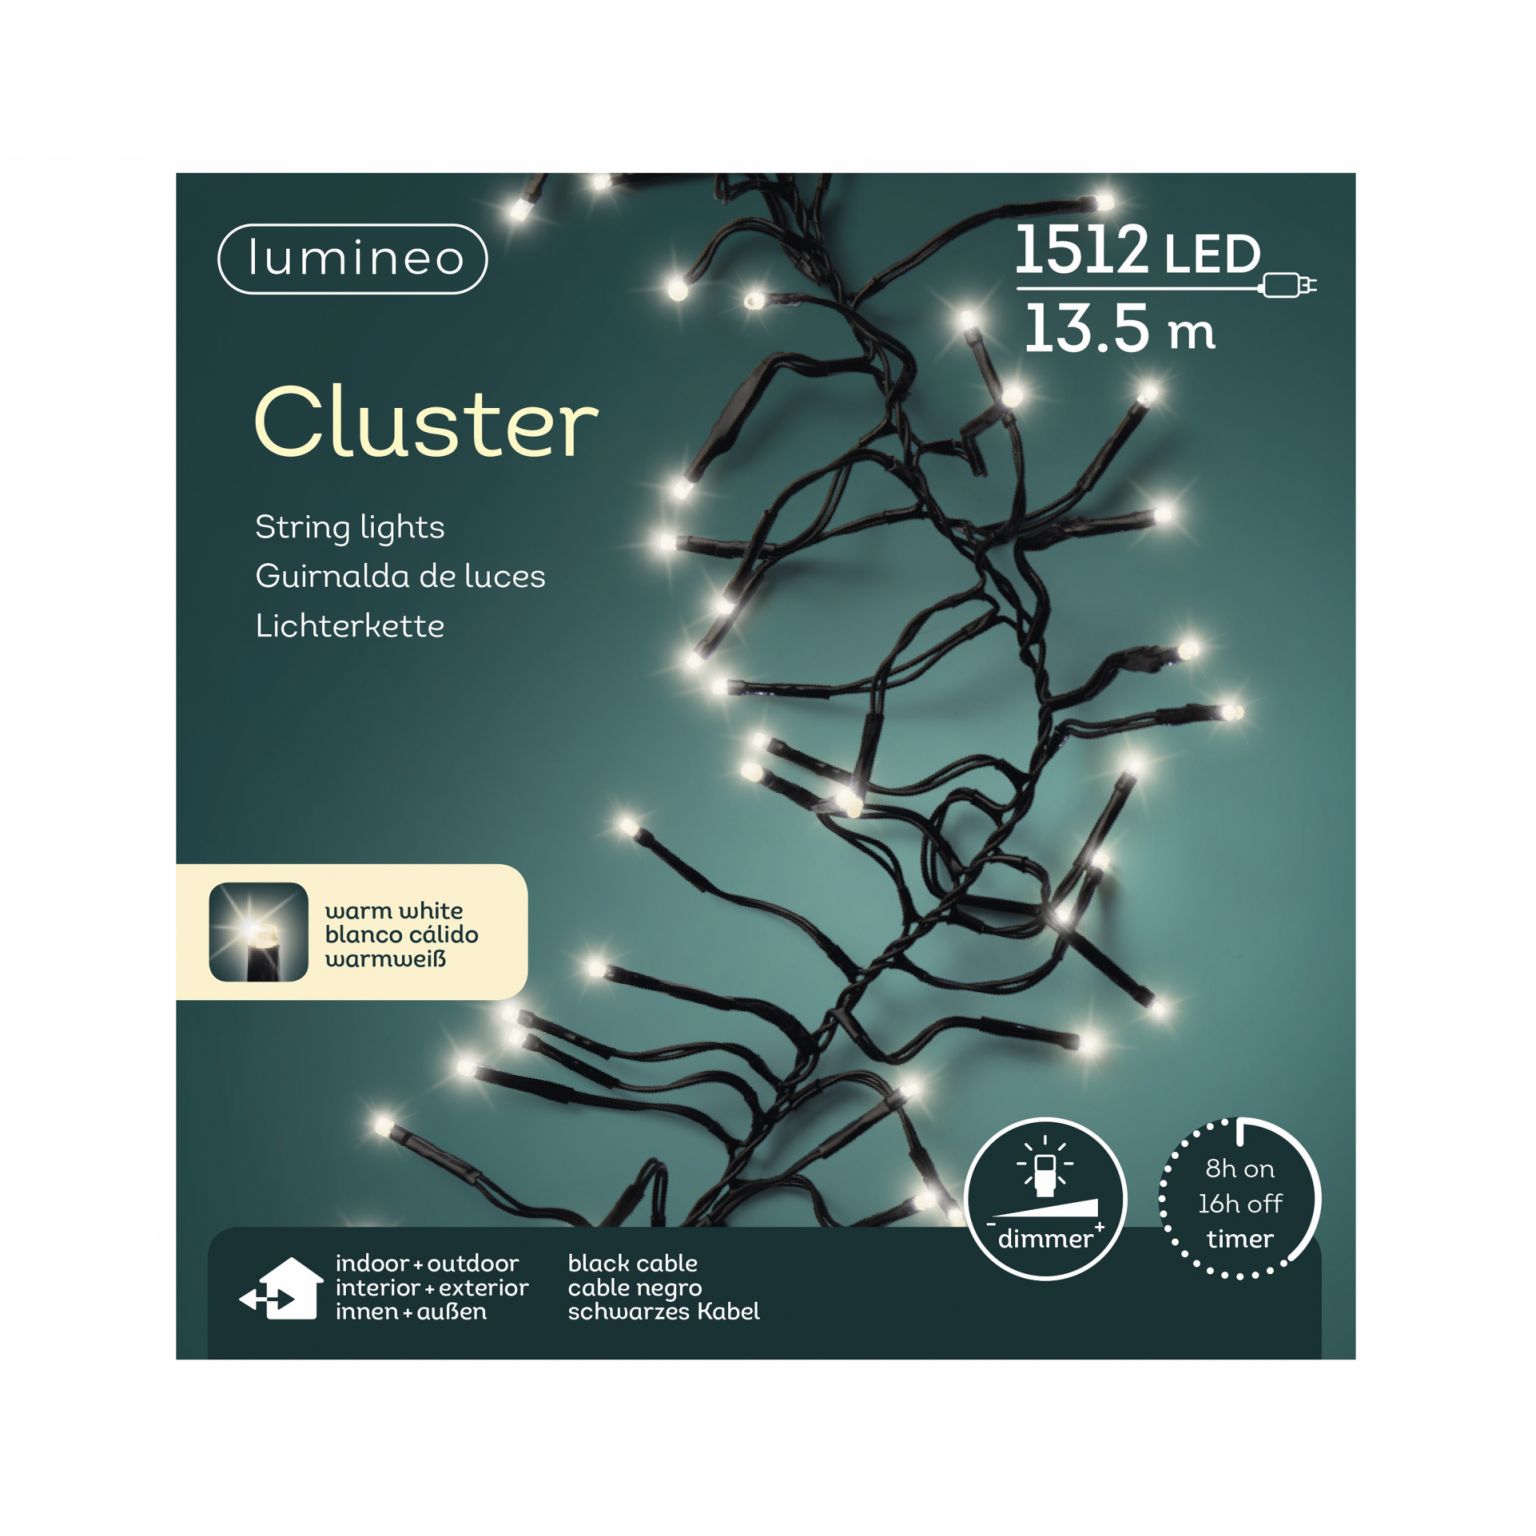 Clusterverlichting lumineo 1512-lamps LED 'warm wit'